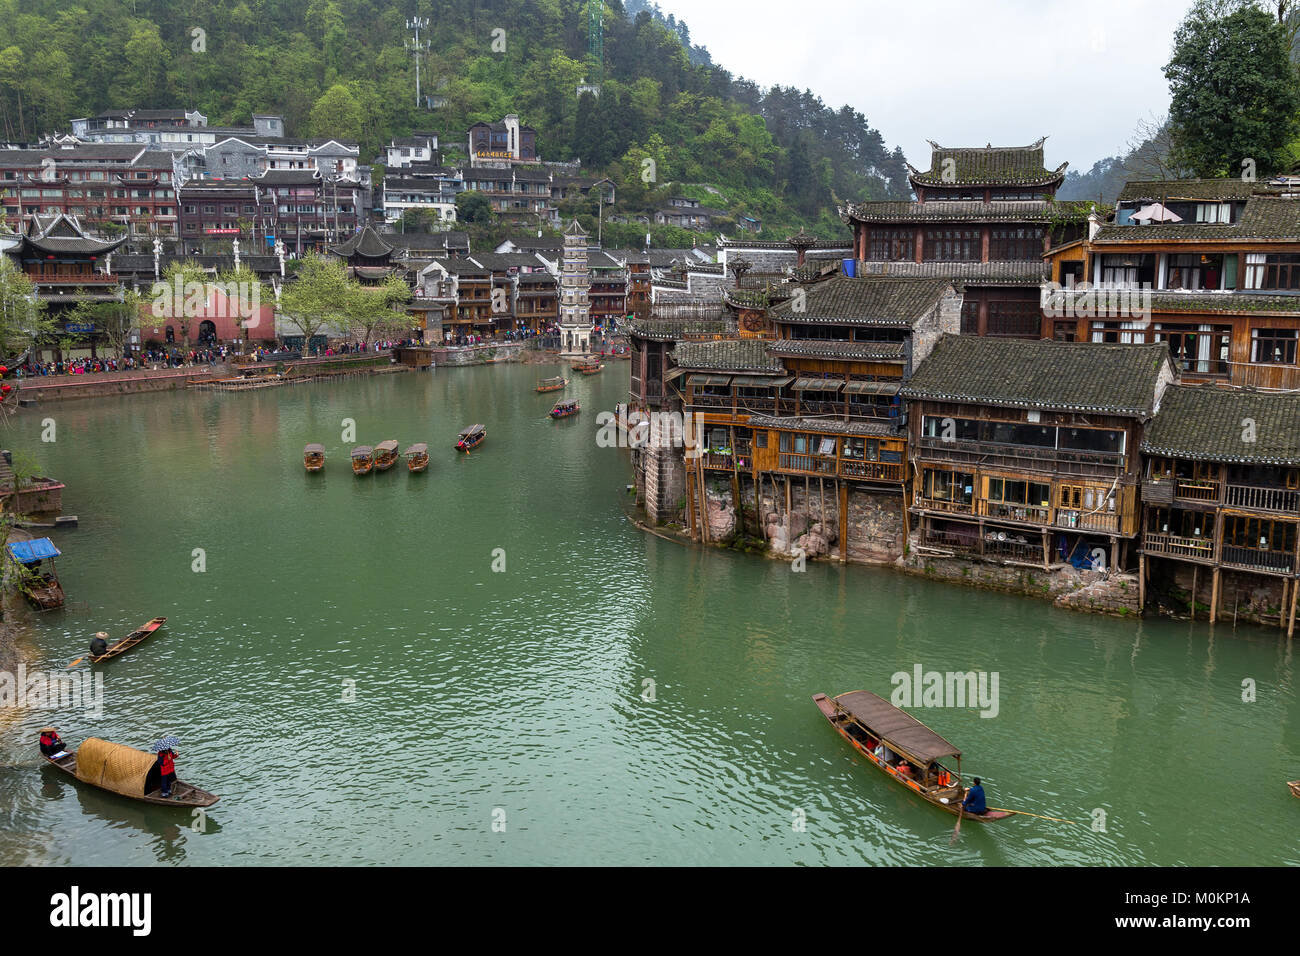 Old Houses on the river in Fenghuang Ancient town, Hunan province, China. This ancient town was added to the UNESCO World Heritage Tentative List in t Stock Photo